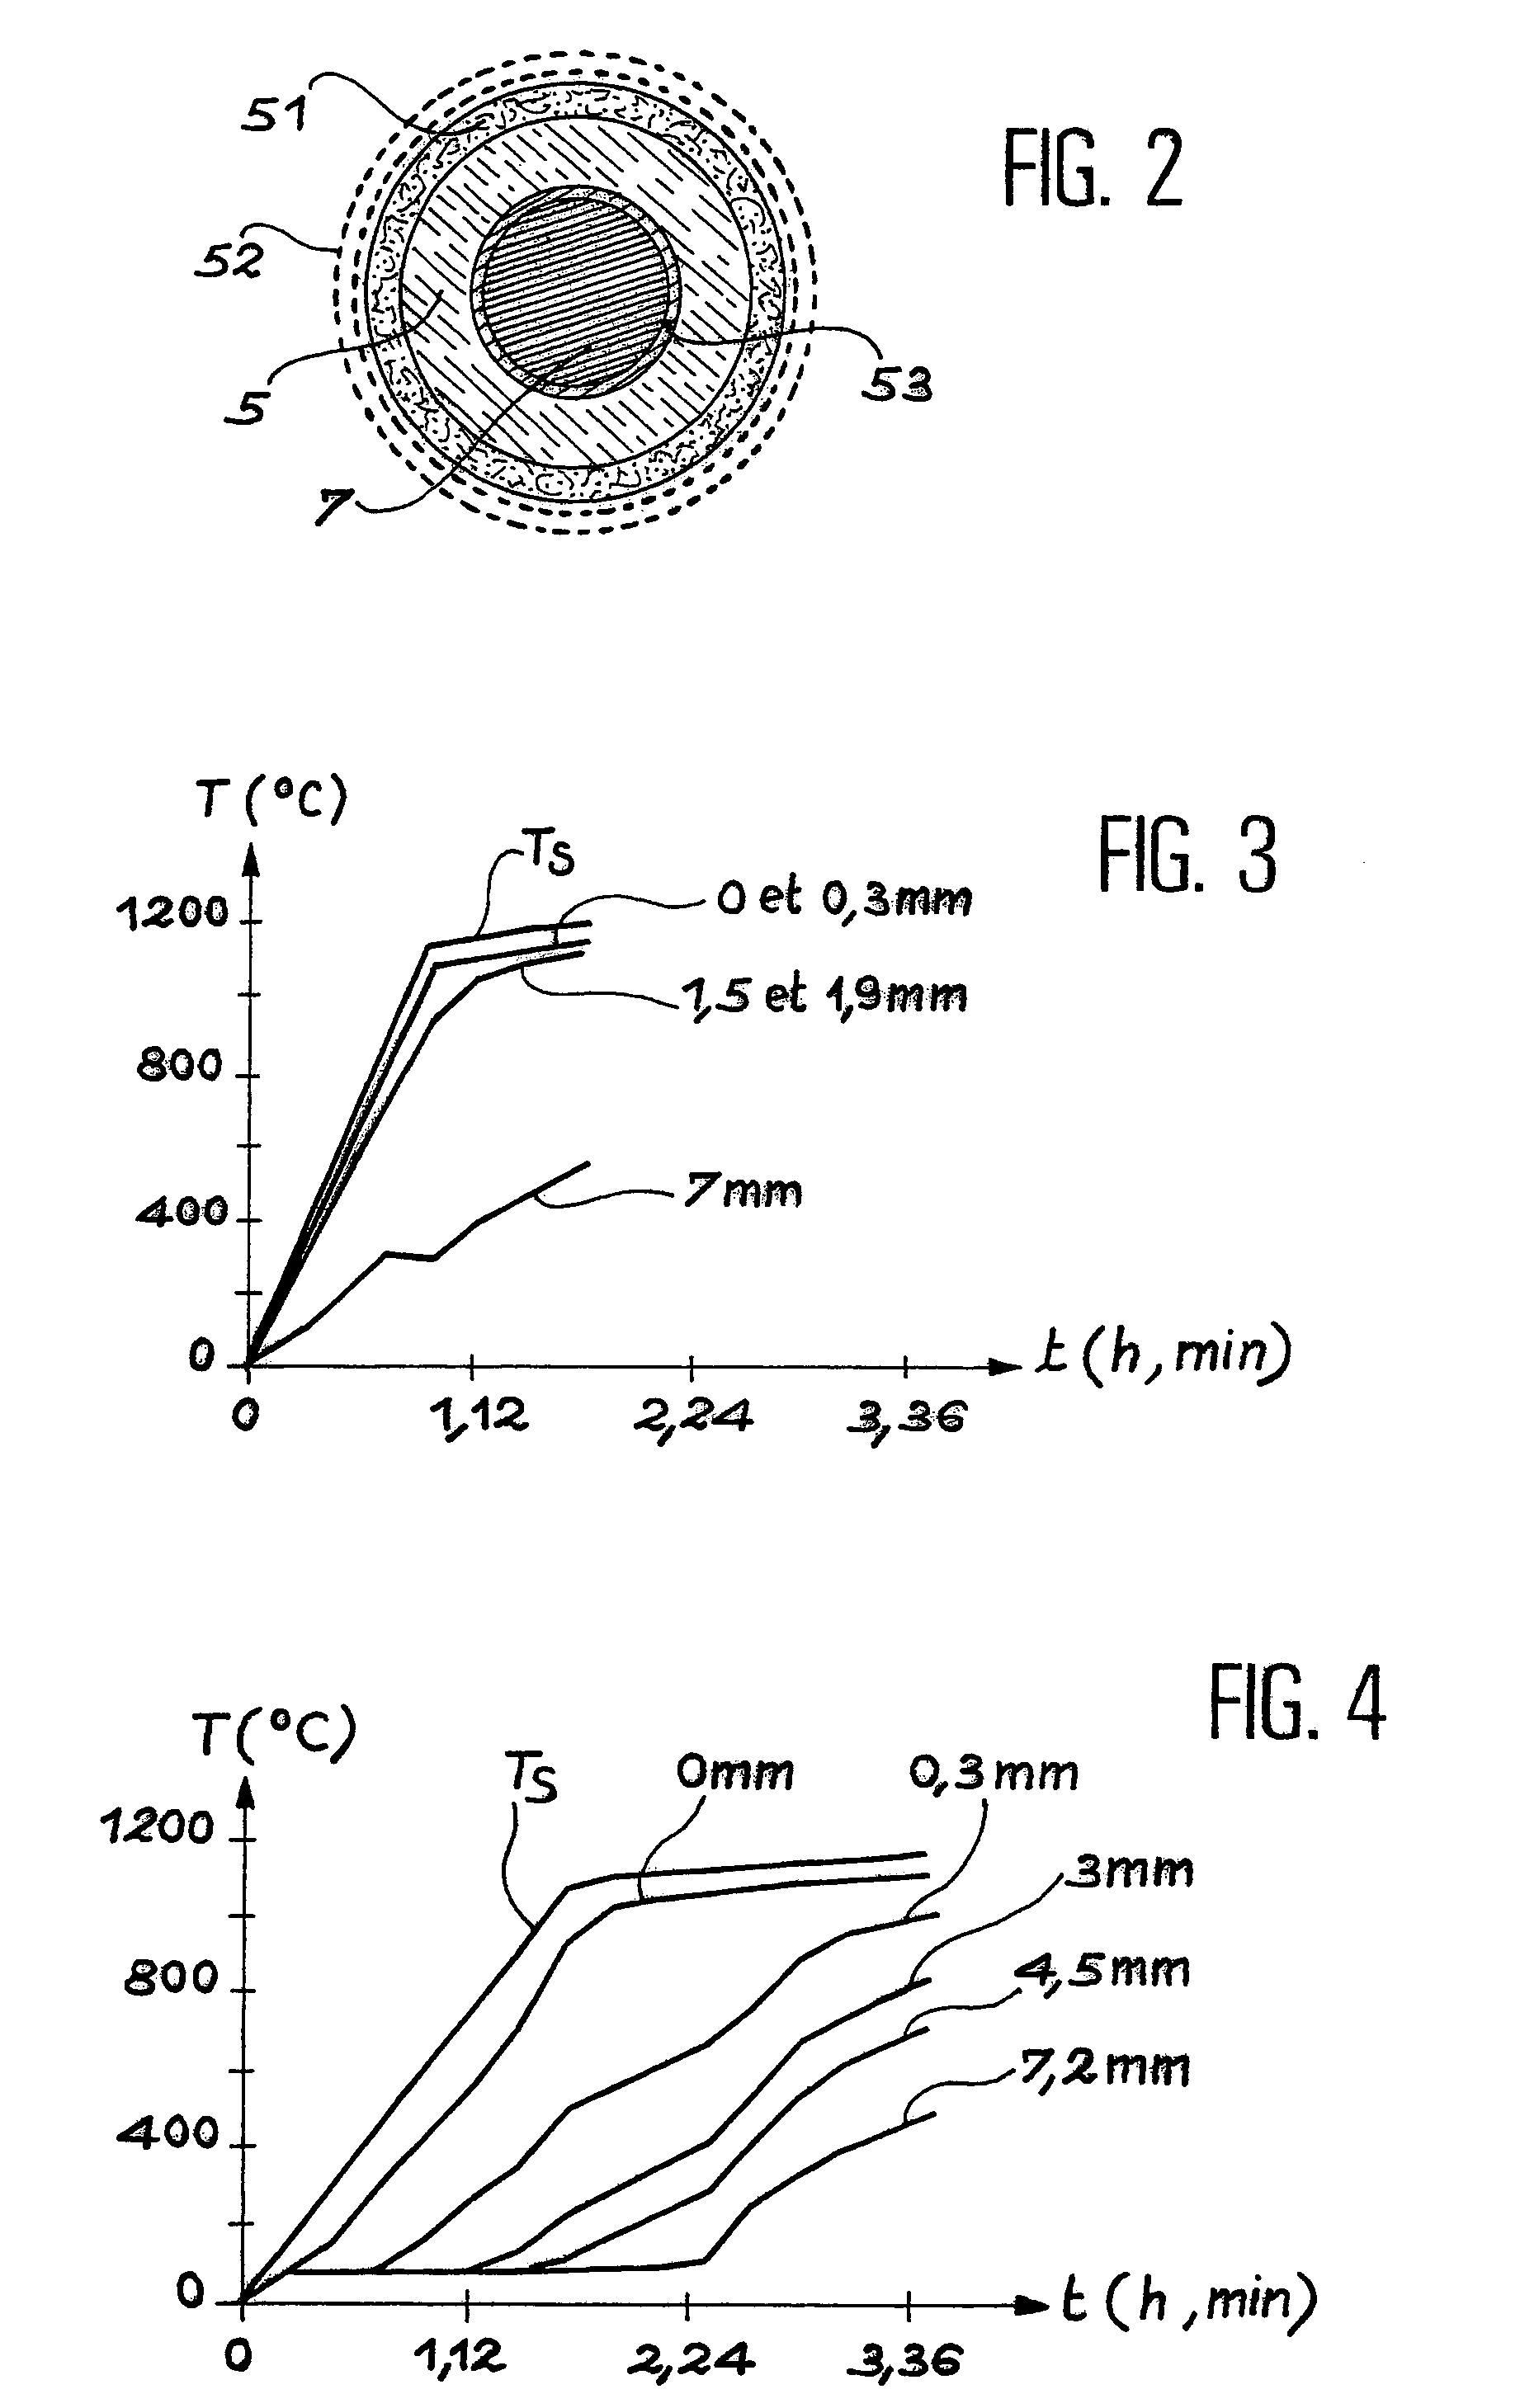 Methods for calefaction densification of a porous structure